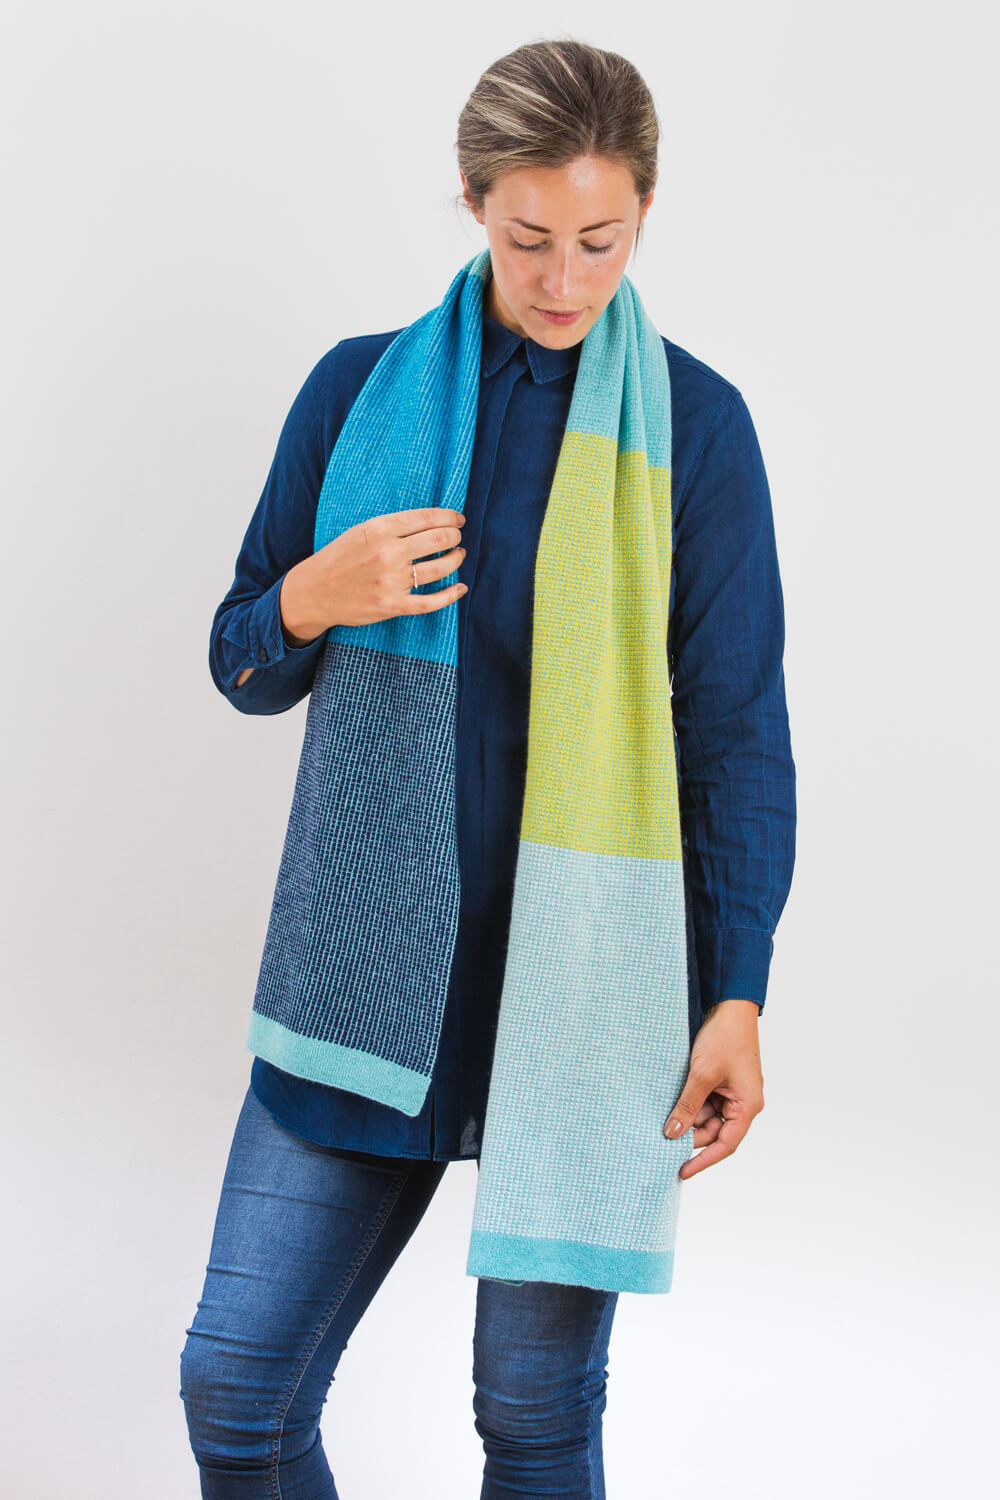 Knitted Lambswool Scarf Women'sMens